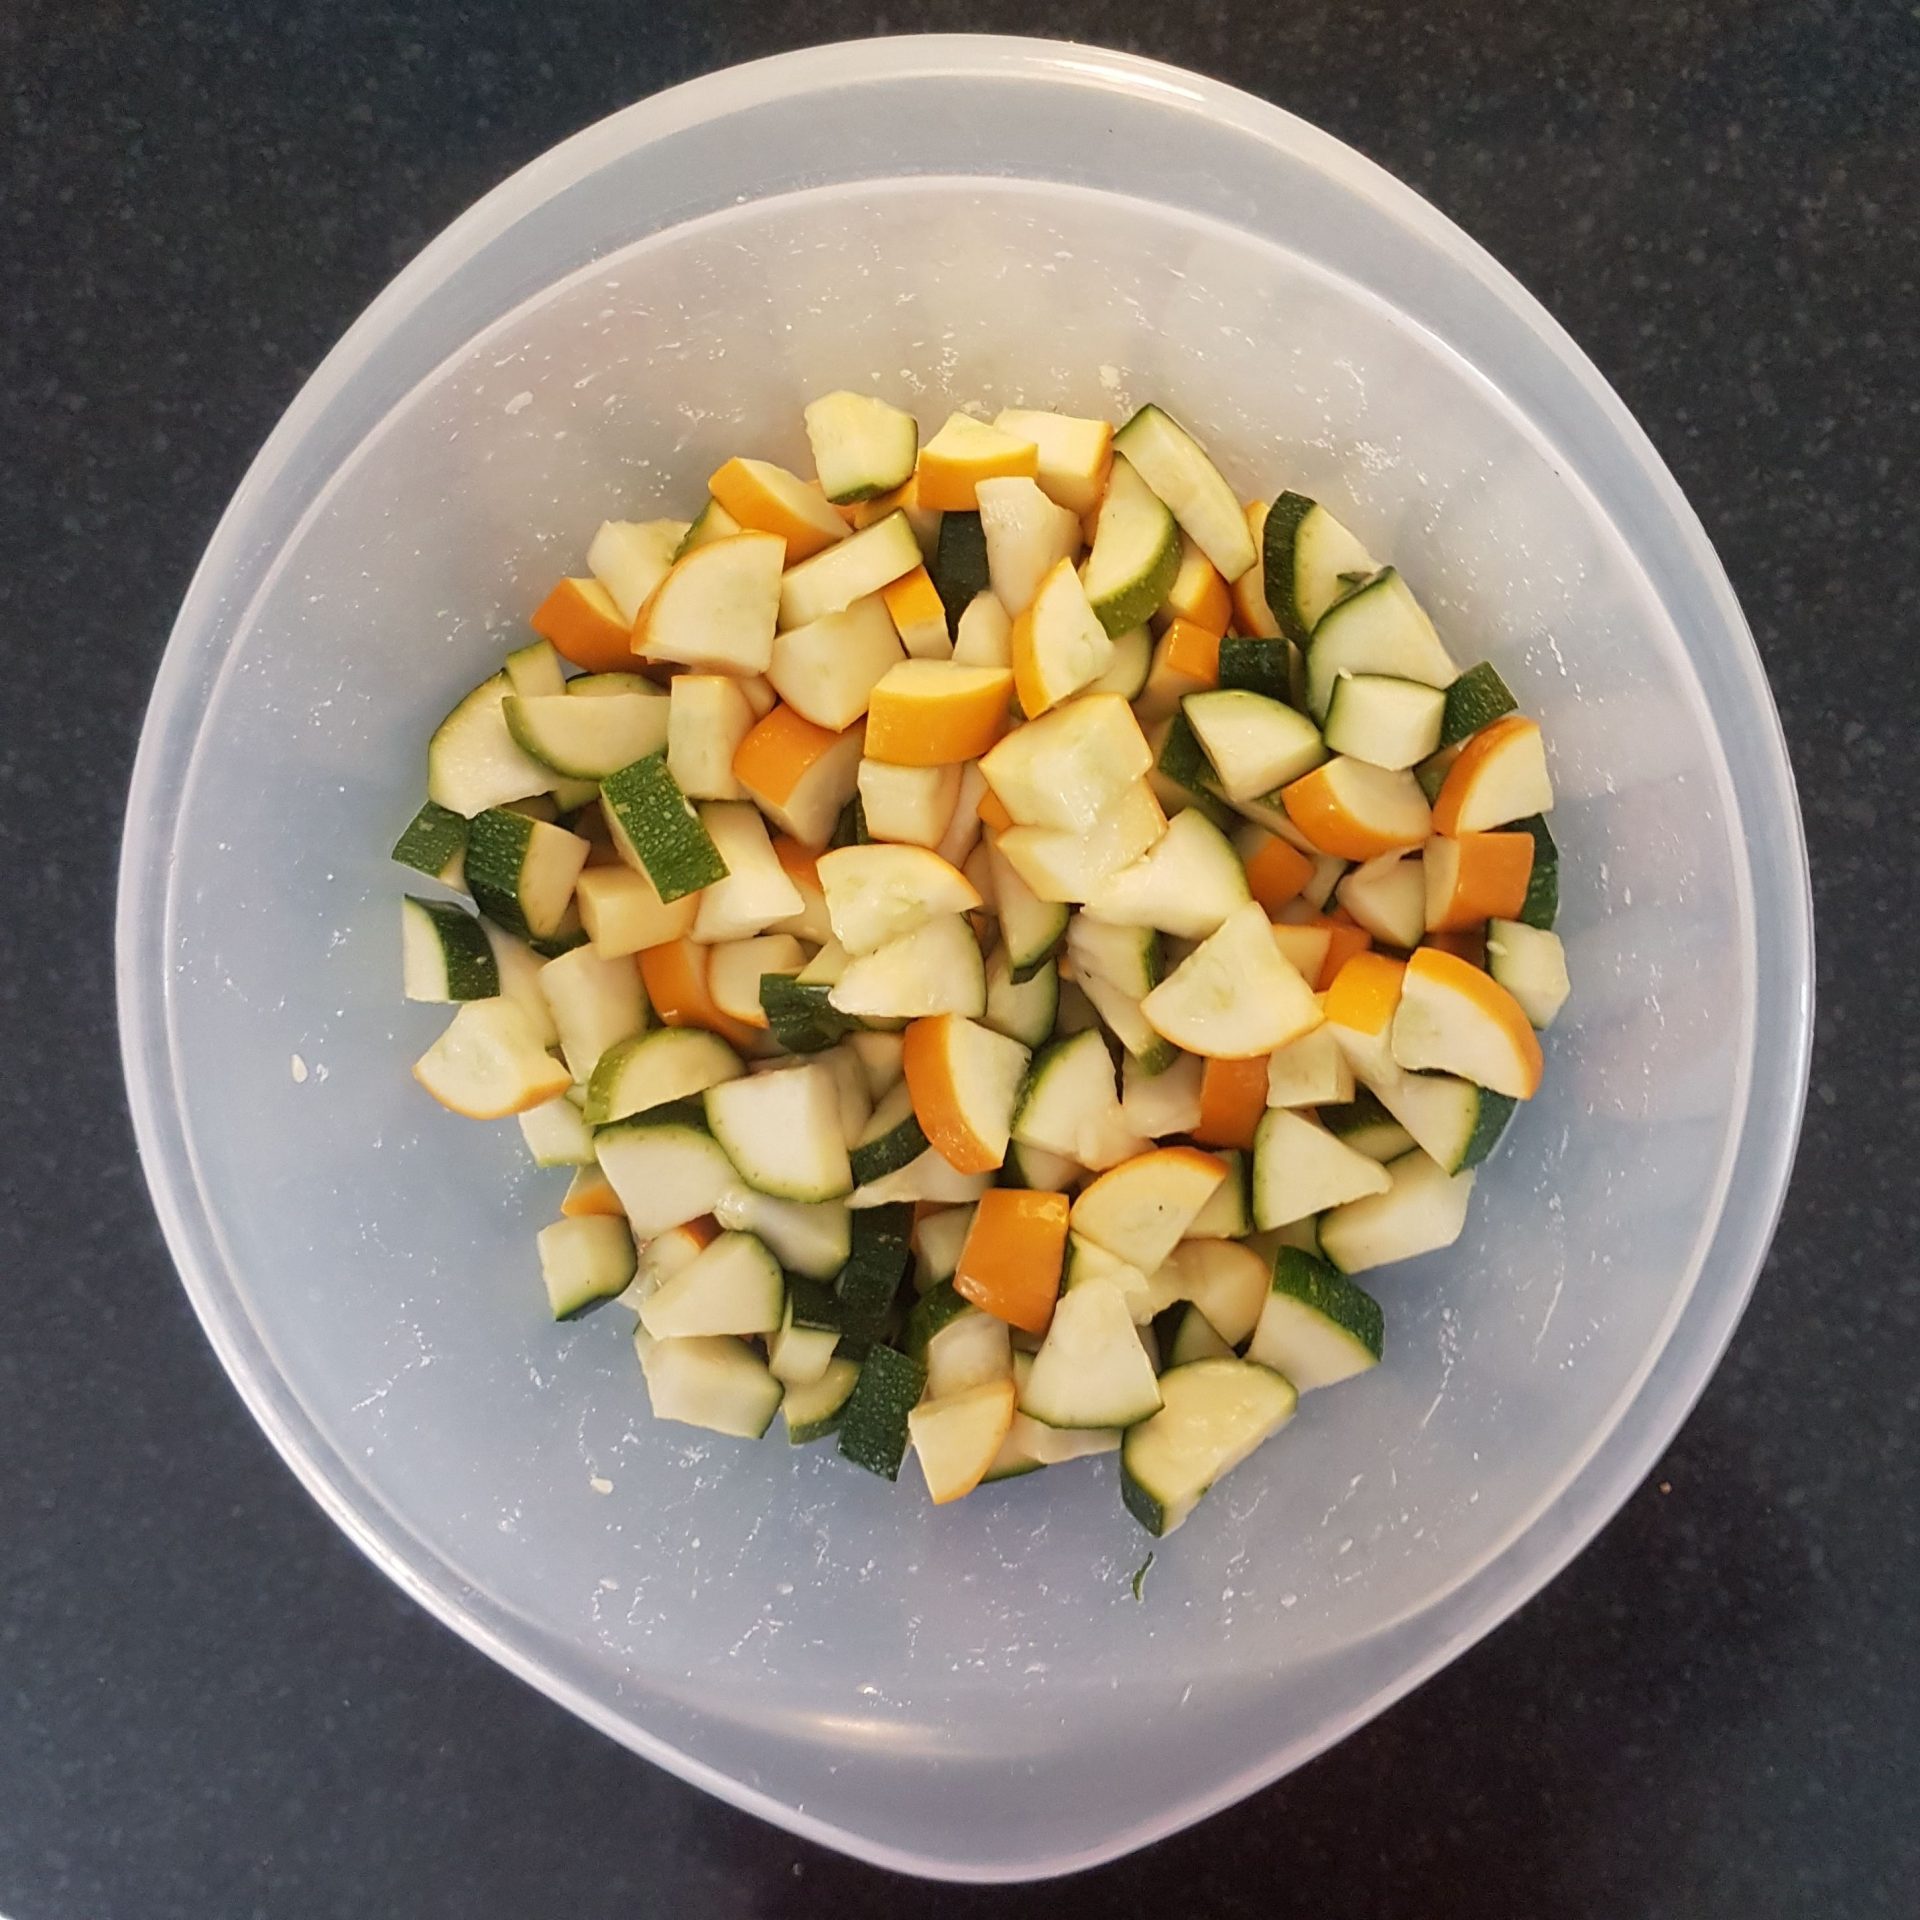 A bowl of green and yellow courgette chunks